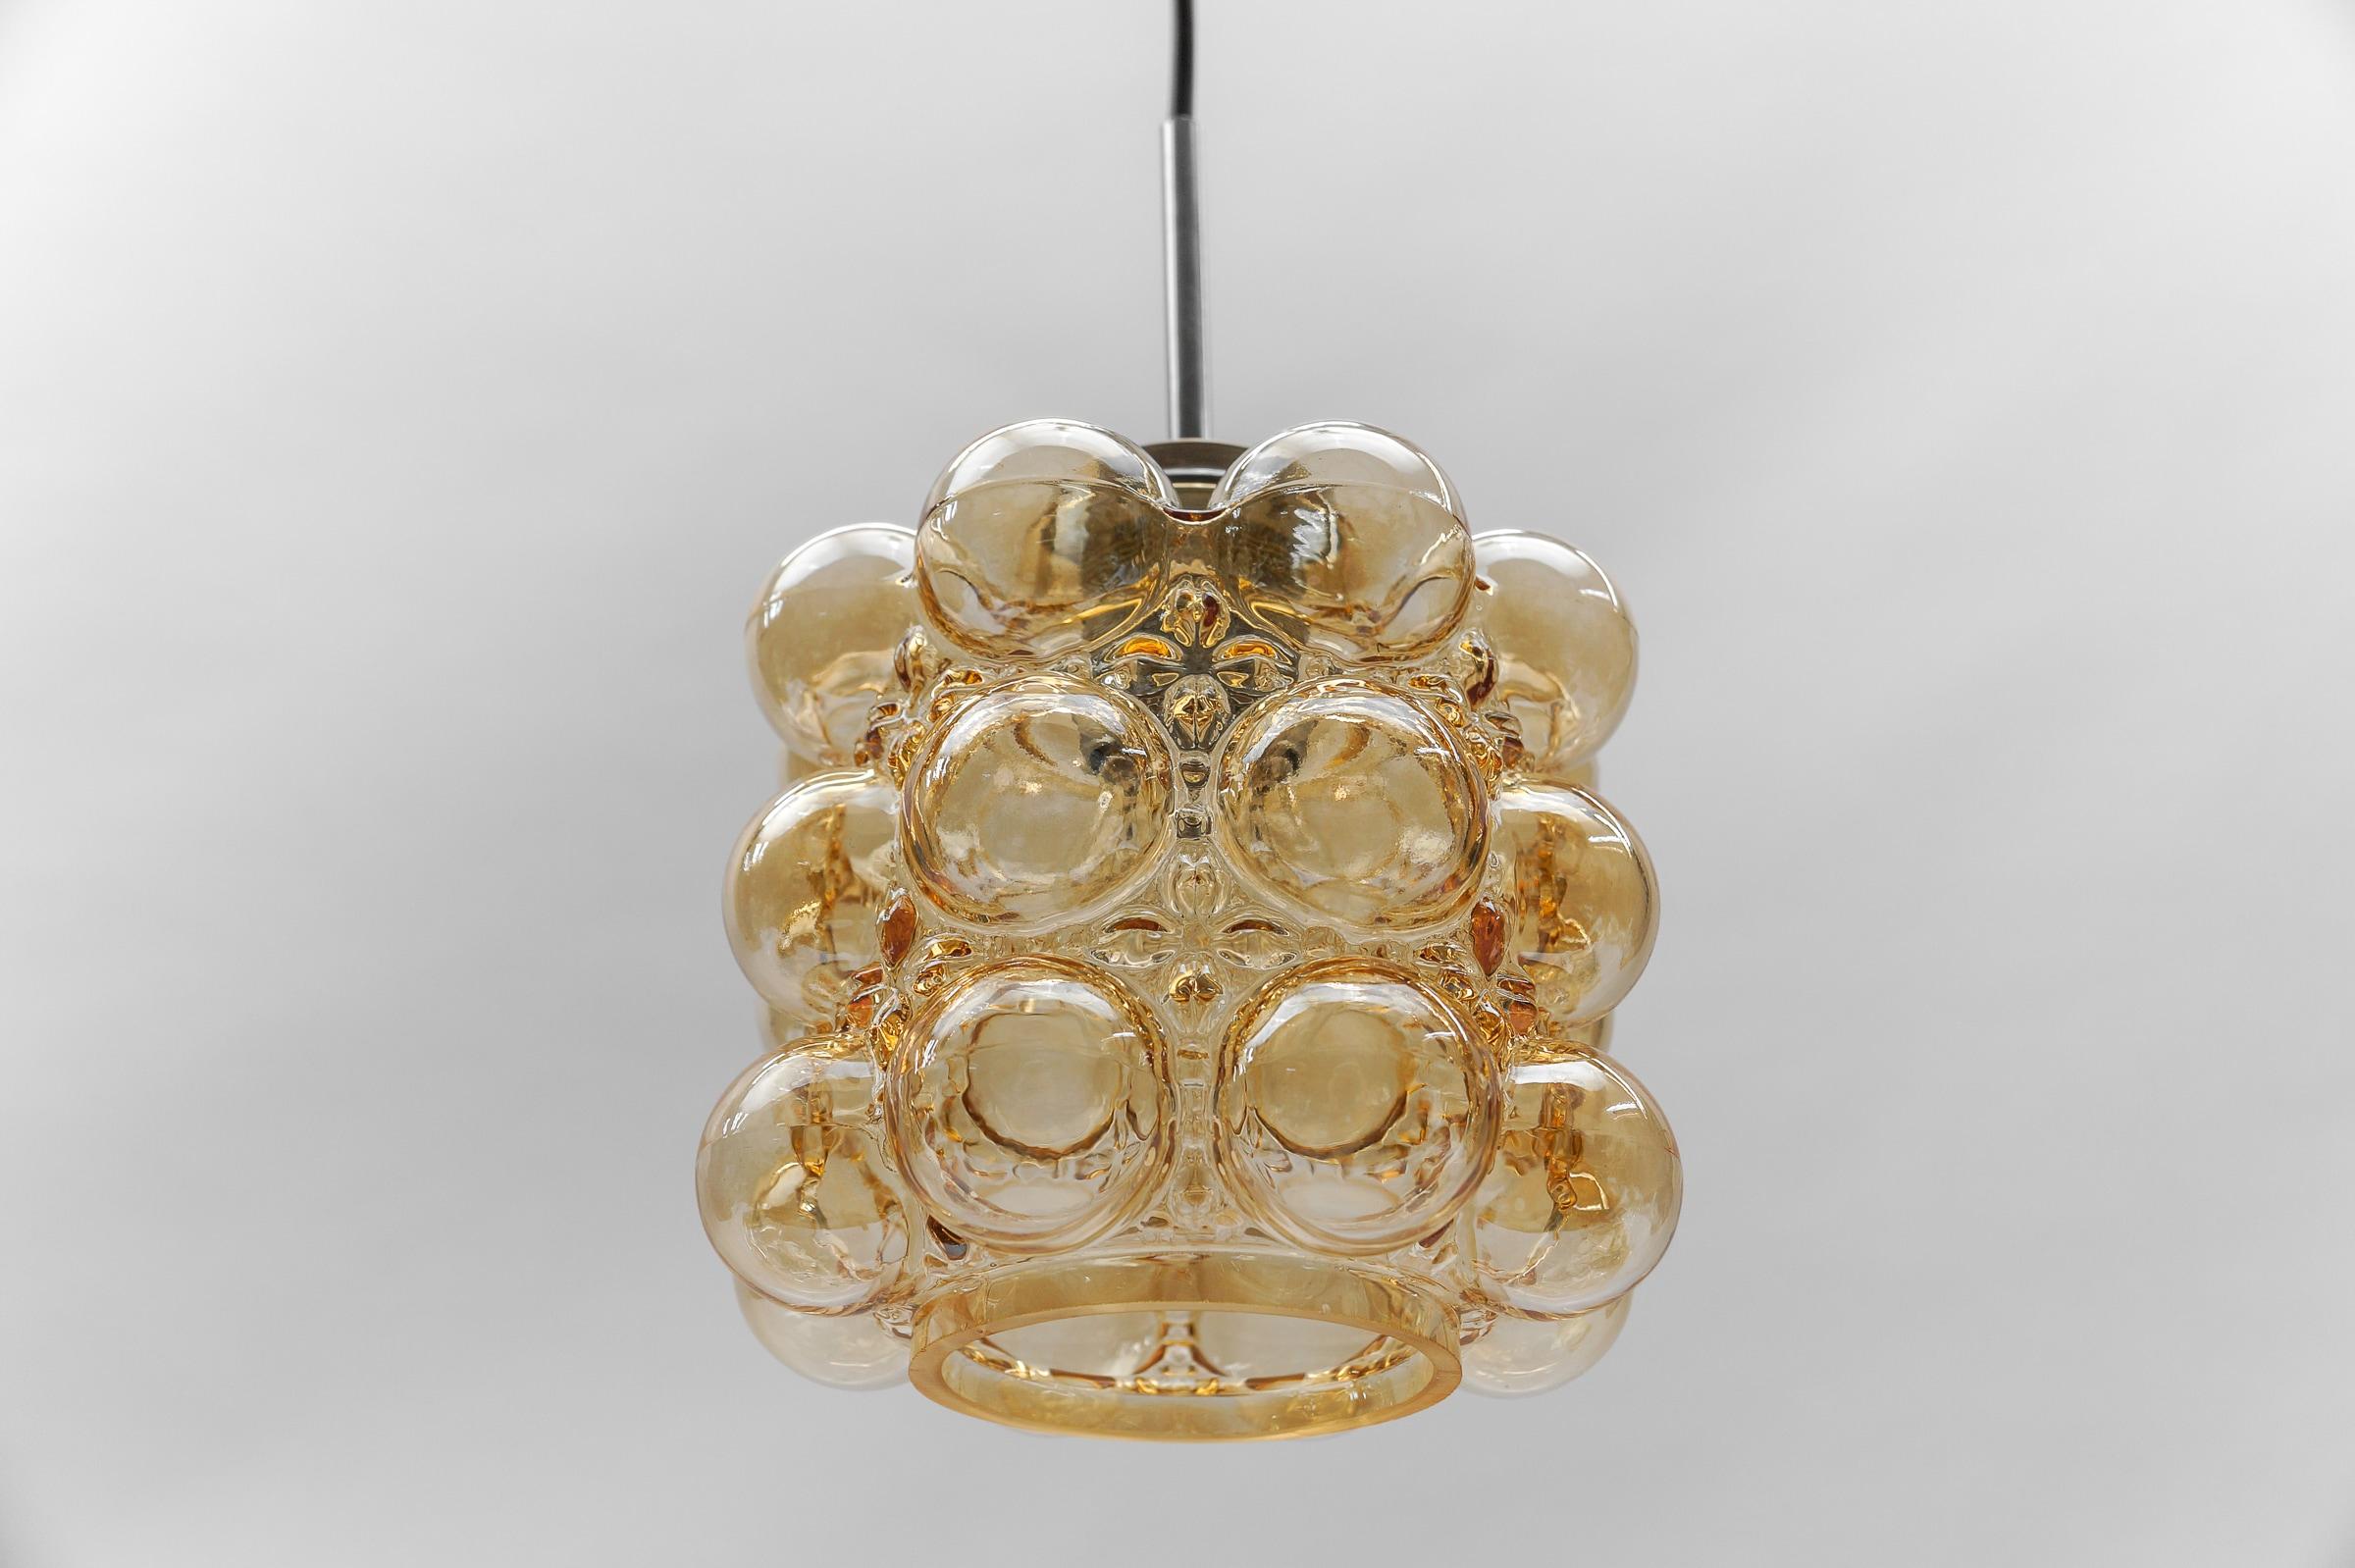 Amber Bubble Glass Ceiling Lamp by Helena Tynell for Limburg, Germany 1960s

Dimensions
Height: 23.62 in. 85 cm)
Diameter: 9.44 in. (19 cm)

The fixture need 1 x E27 standard bulb with 60W max.

Light bulbs are not included. 
It is possible to